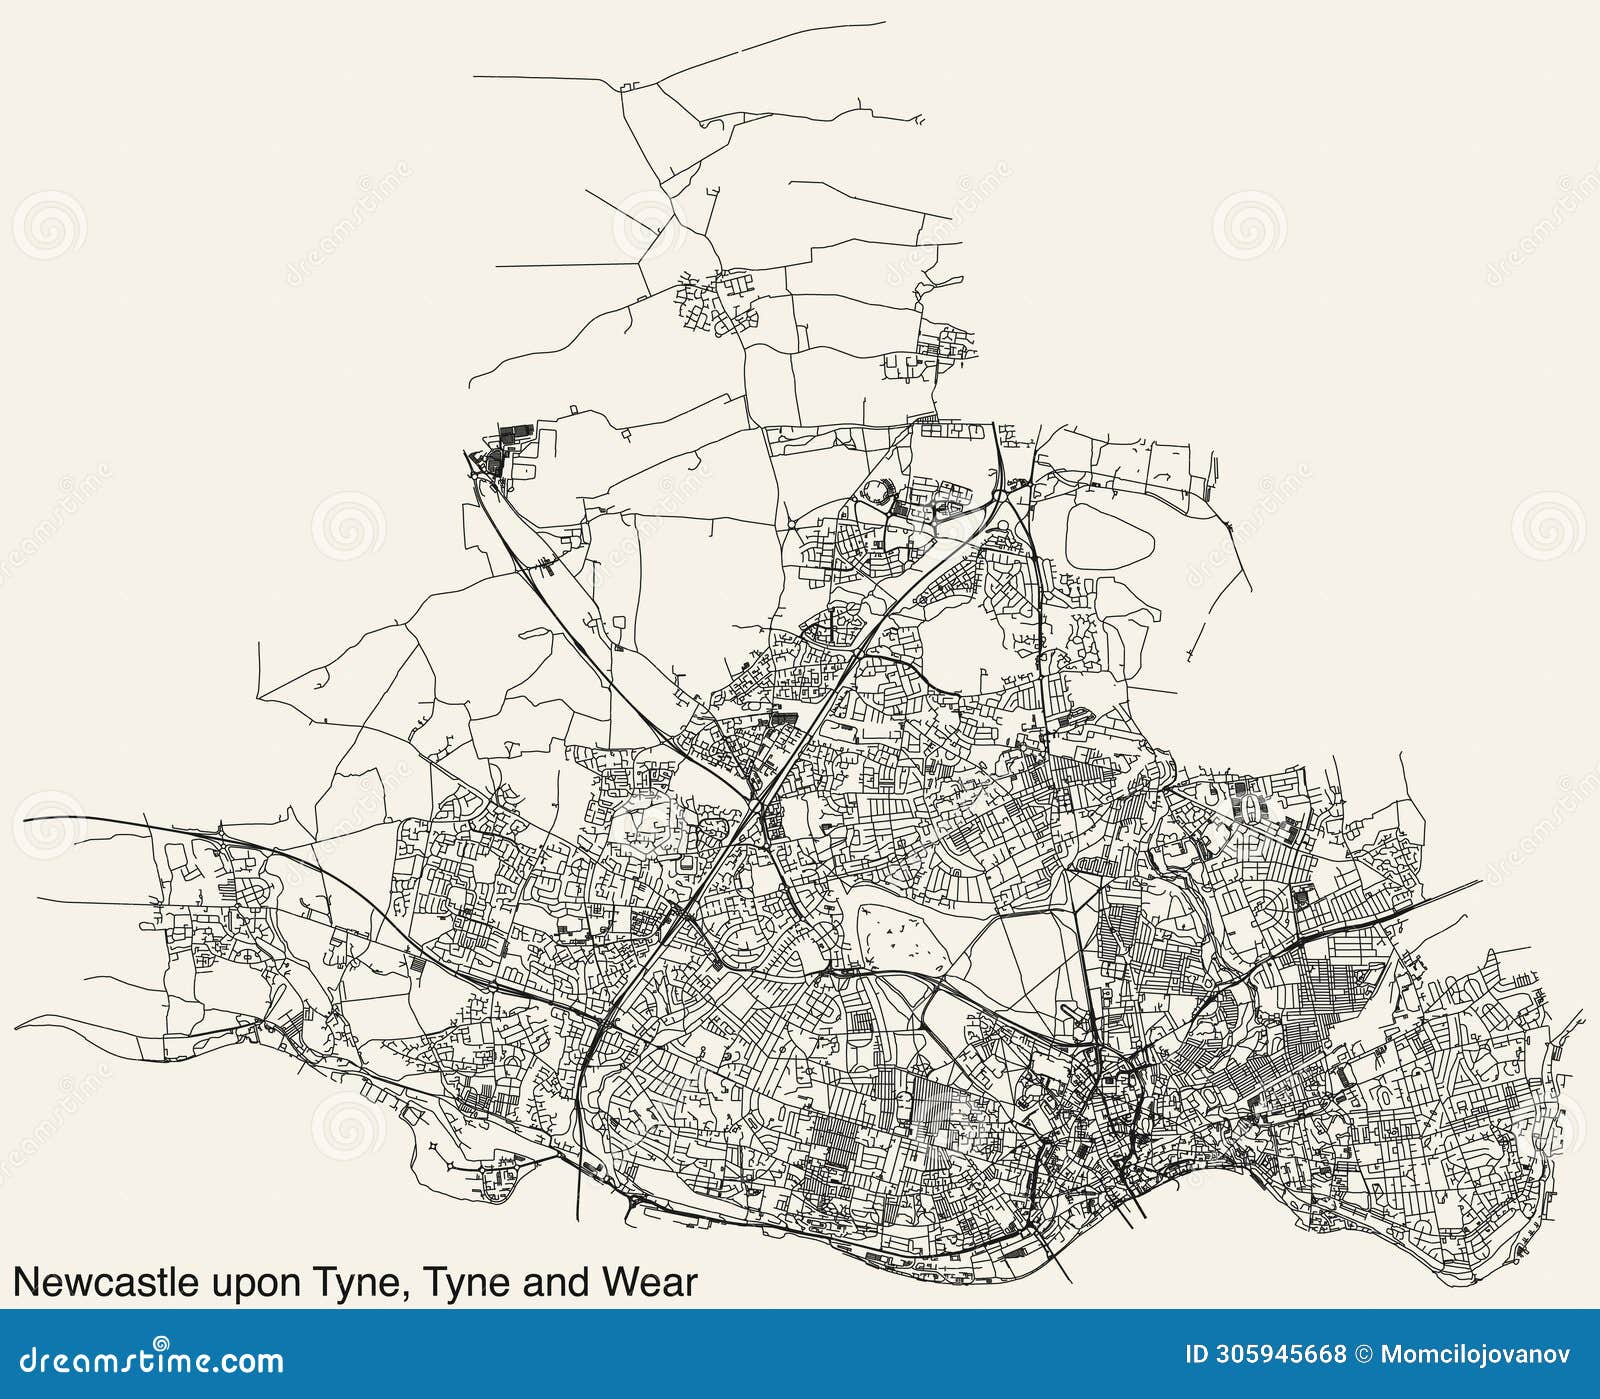 street roads map of the metropolitan borough and city of newcastle upon tyne, tyne and wear